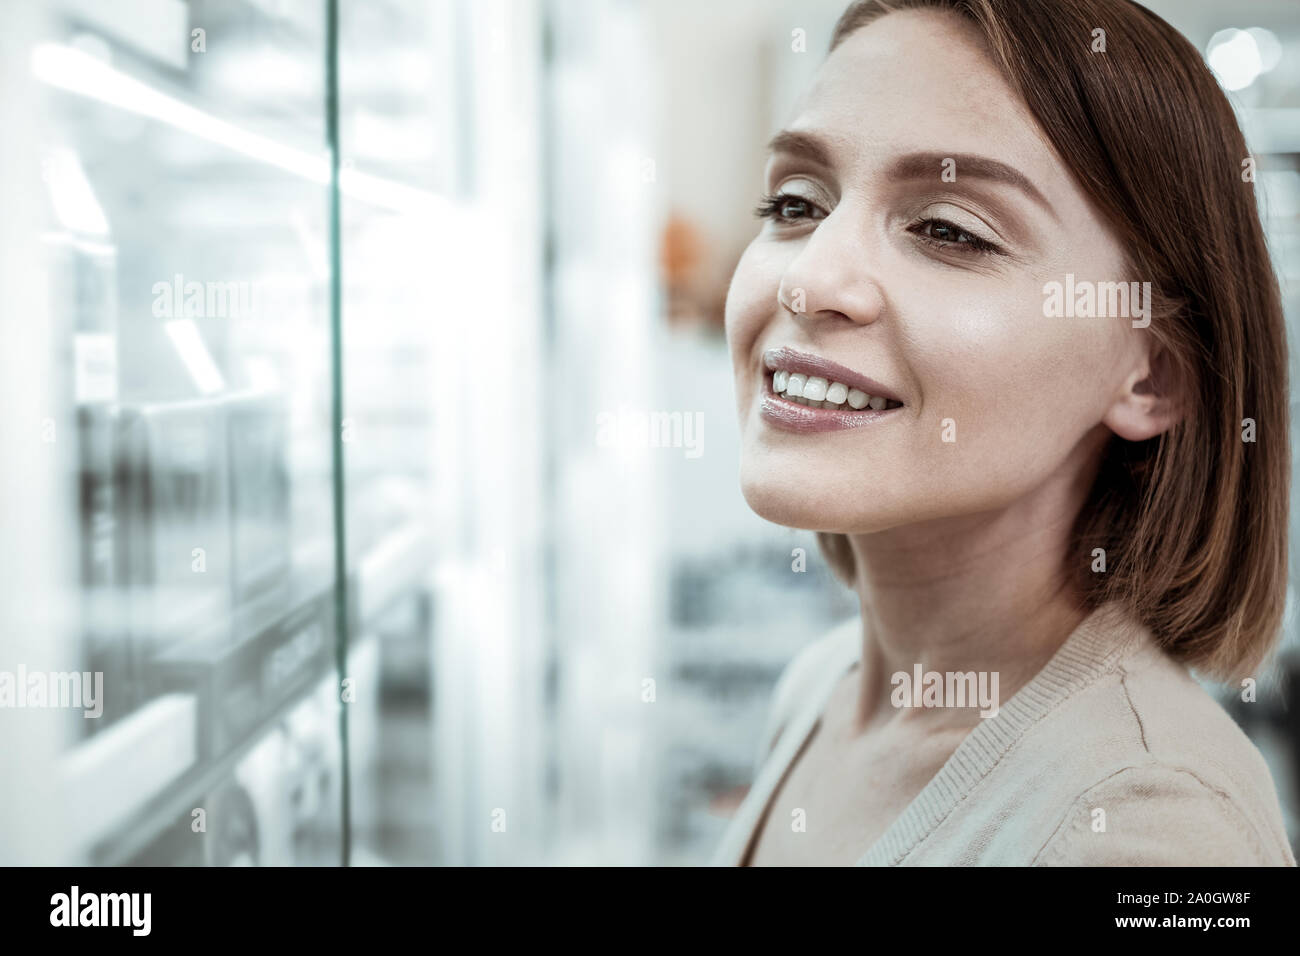 A comely female looking at the drugstore window with pills. Stock Photo